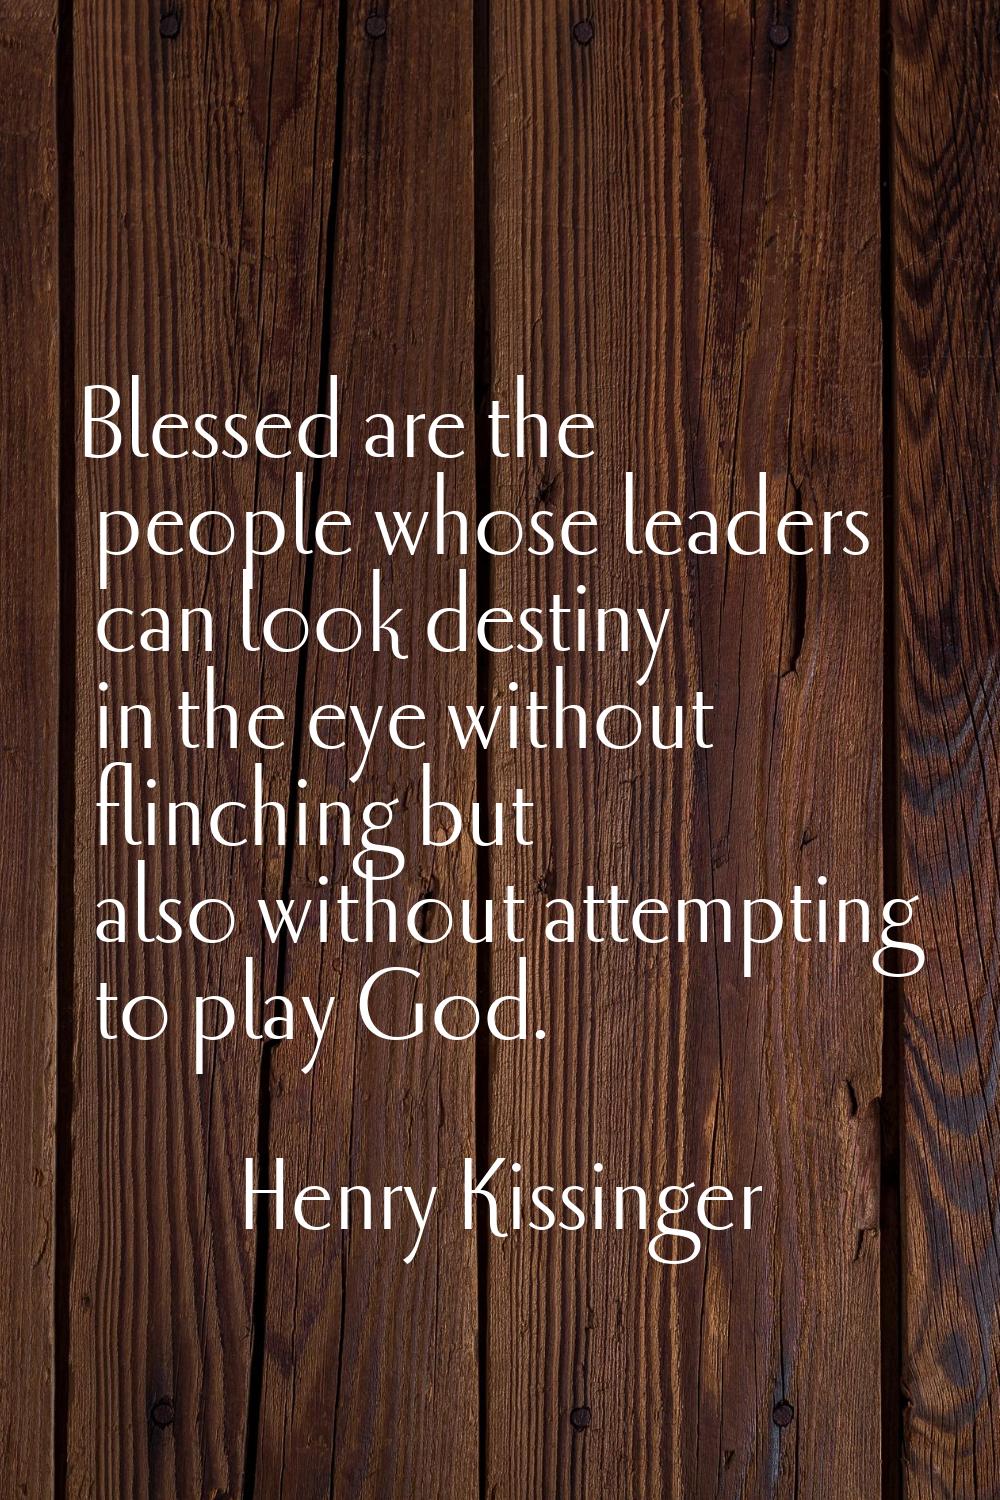 Blessed are the people whose leaders can look destiny in the eye without flinching but also without